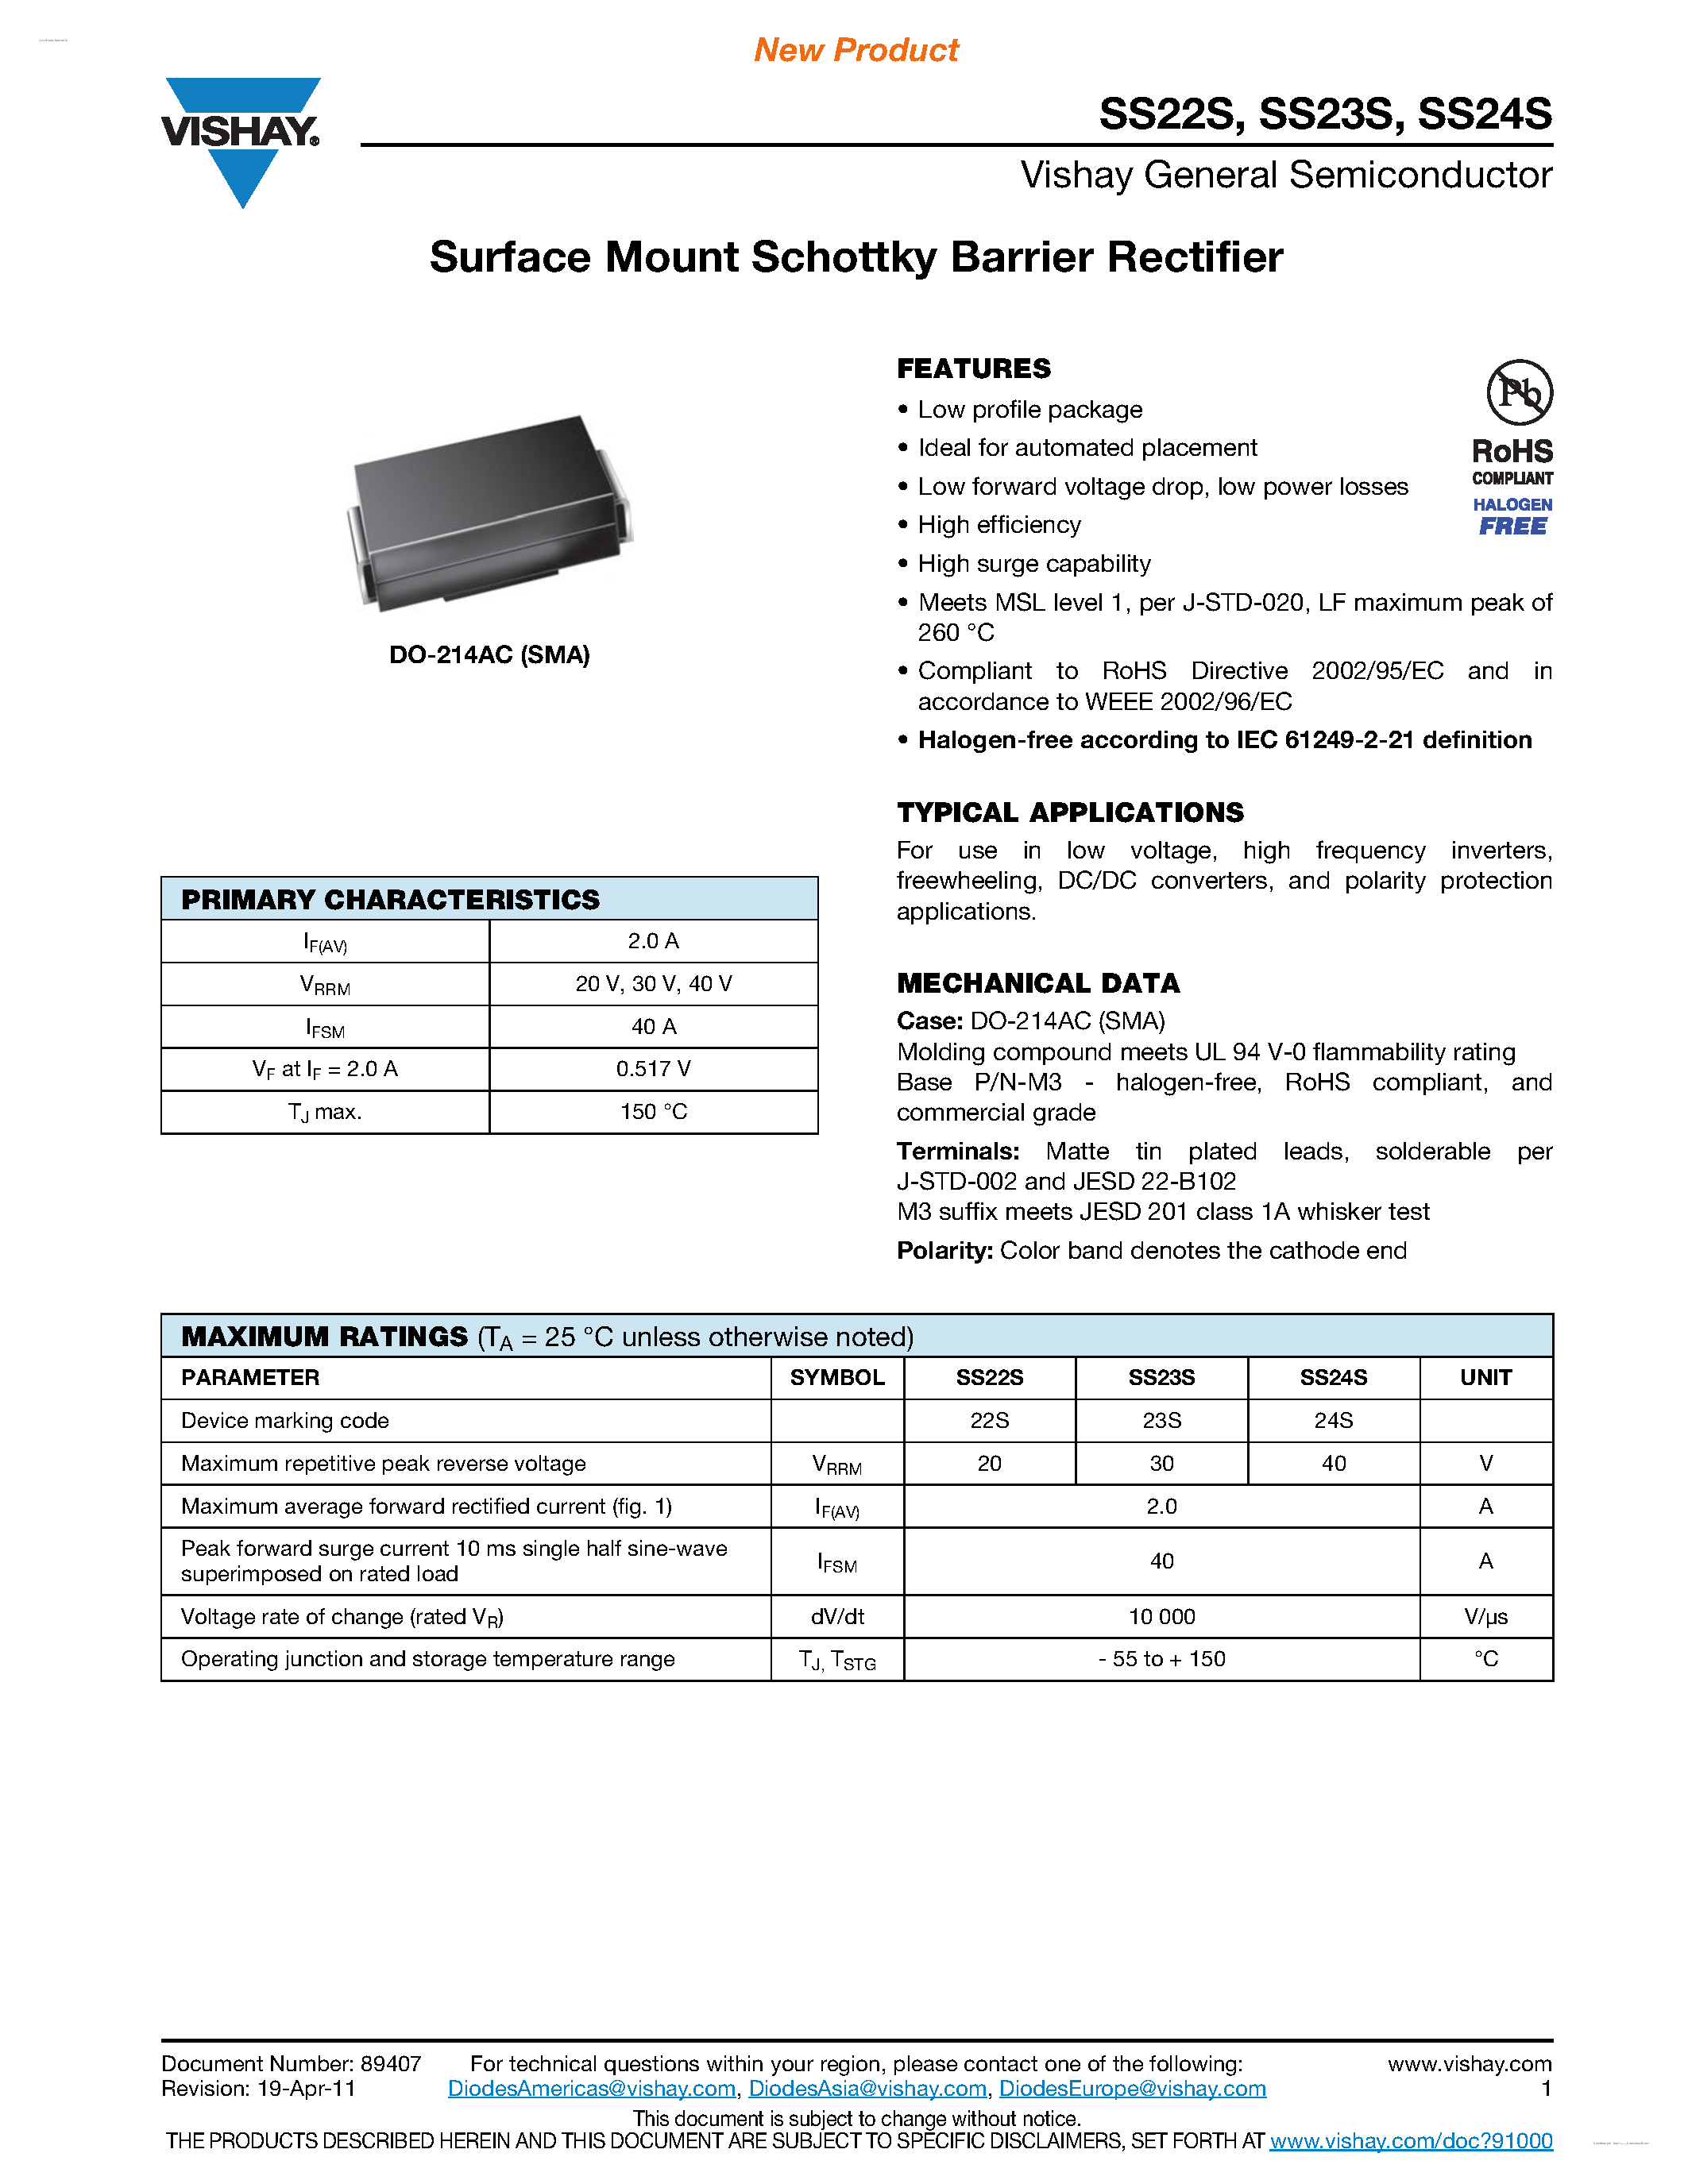 Datasheet SS22S - (SS22S - SS24S) Surface Mount Schottky Barrier Rectifier page 1